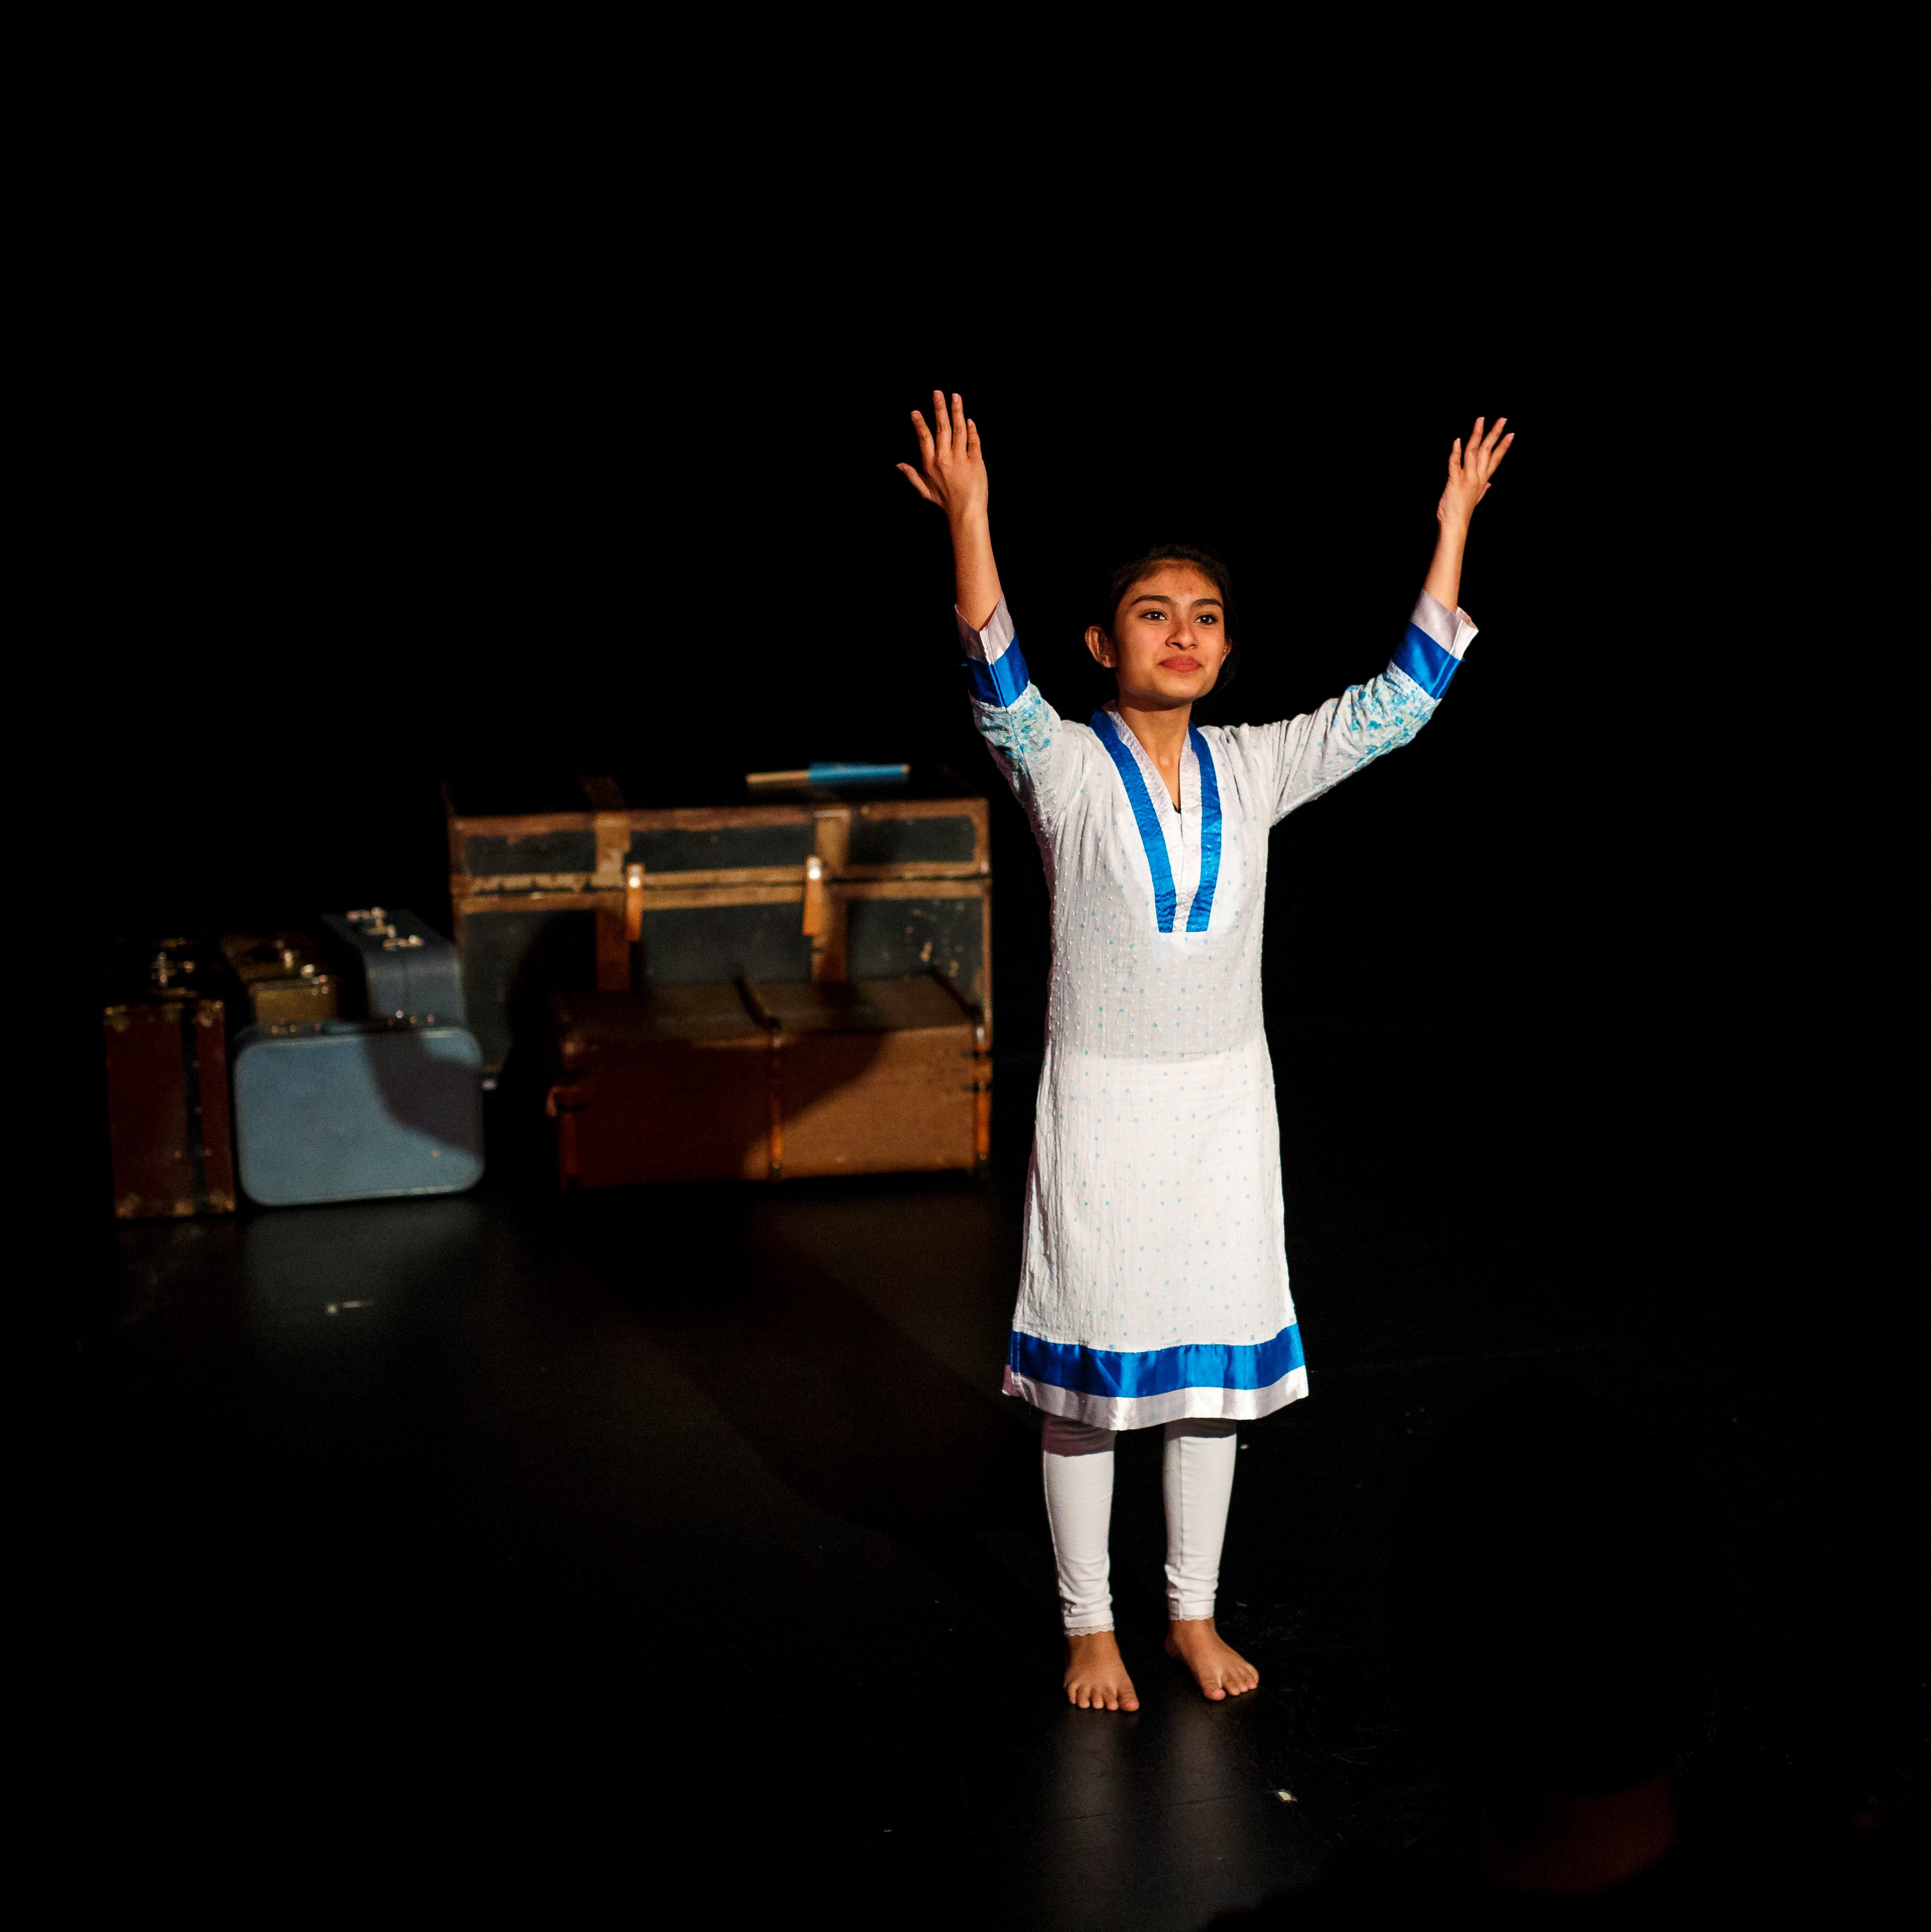 Fatima Nafisa - Young woman on stage in traditional Indian wear. White pants and long shirt with blue trim.